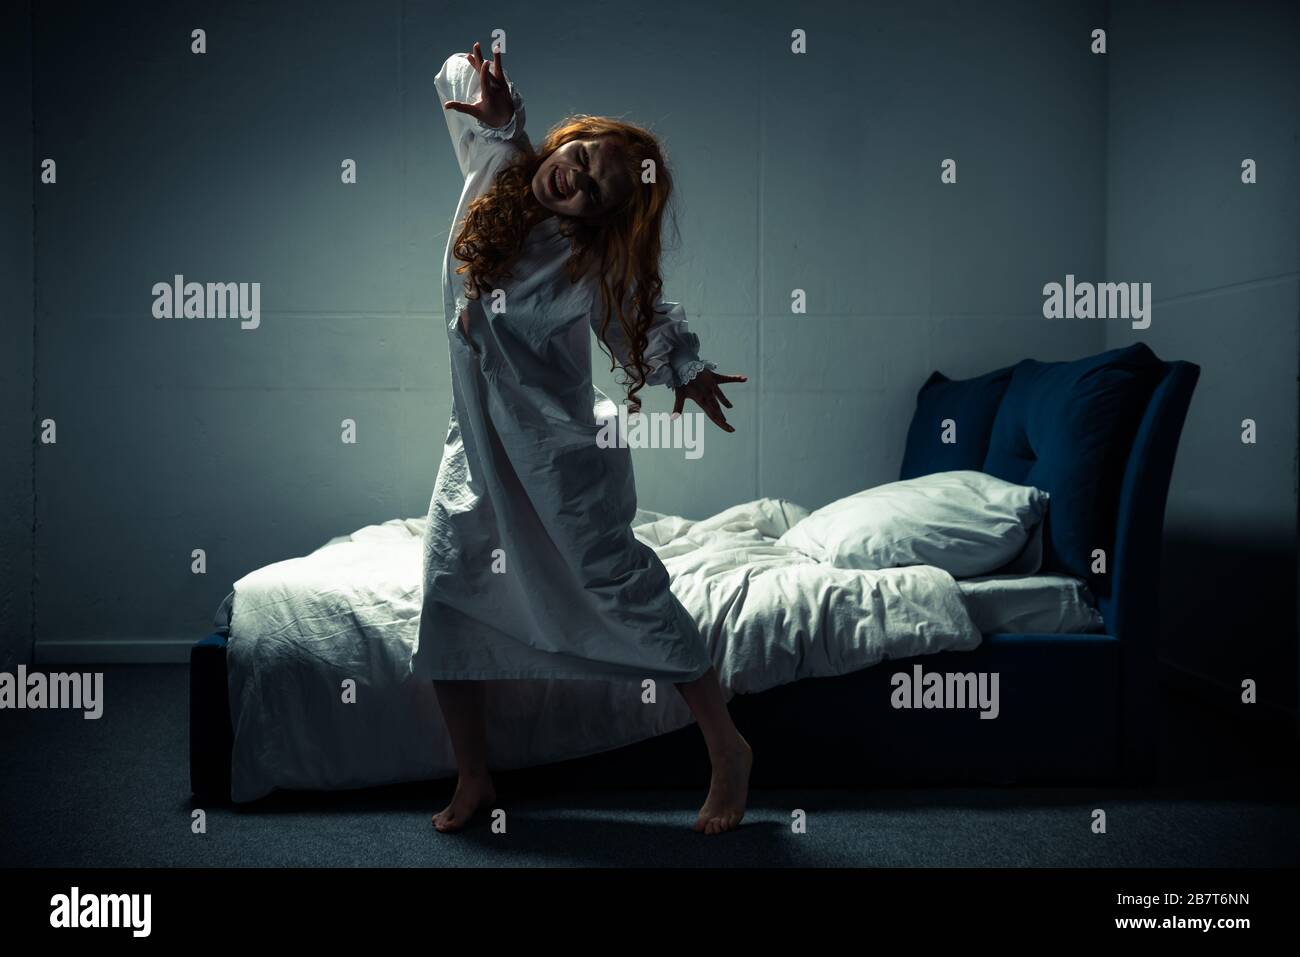 smiling obsessed woman in nightgown standing near bed Stock Photo - Alamy